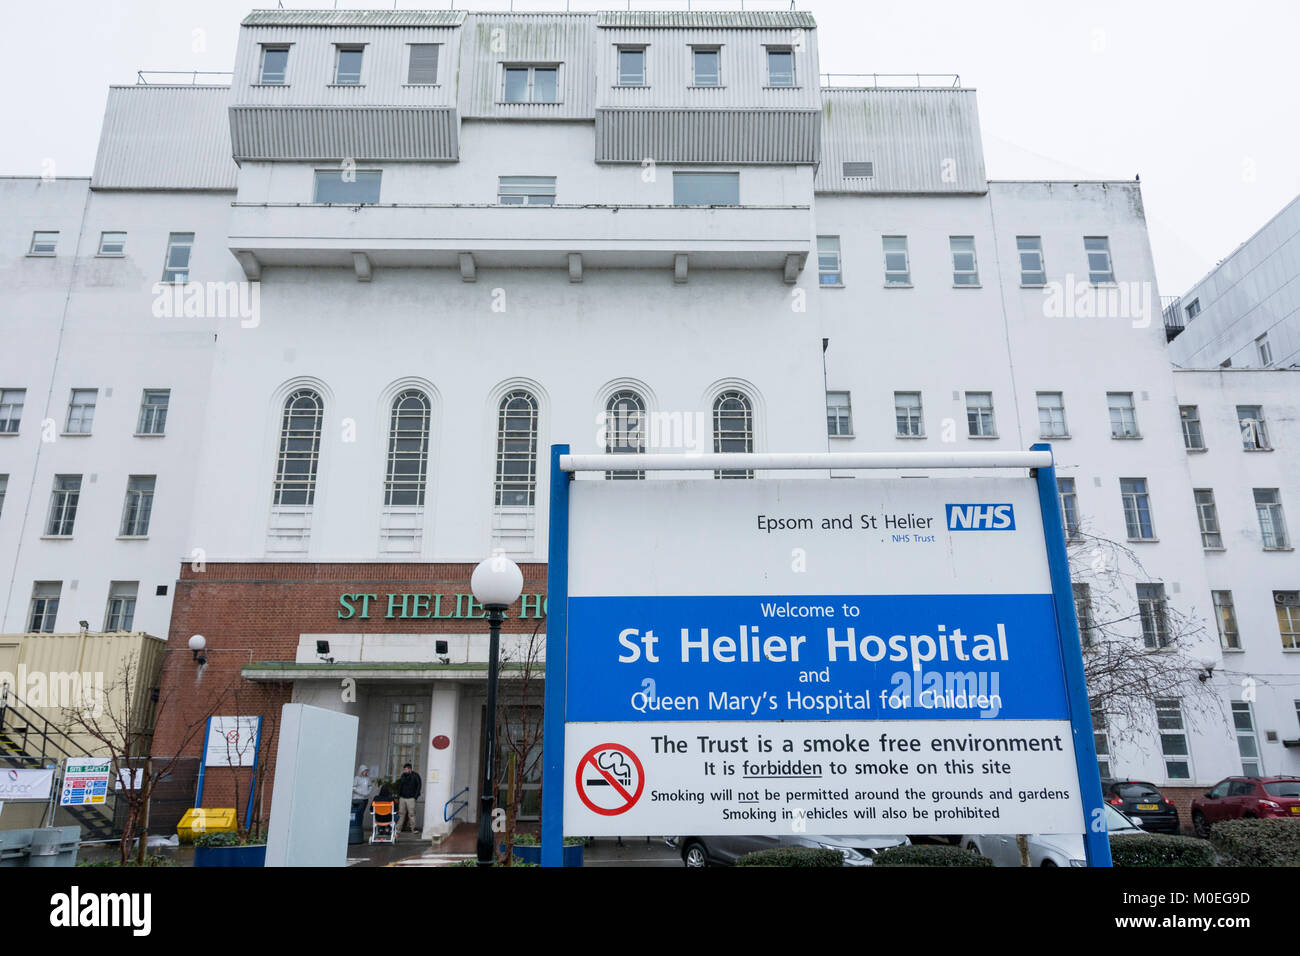 St Helier Hospital, Epsom and St Helier, Sutton, UK Stock Photo